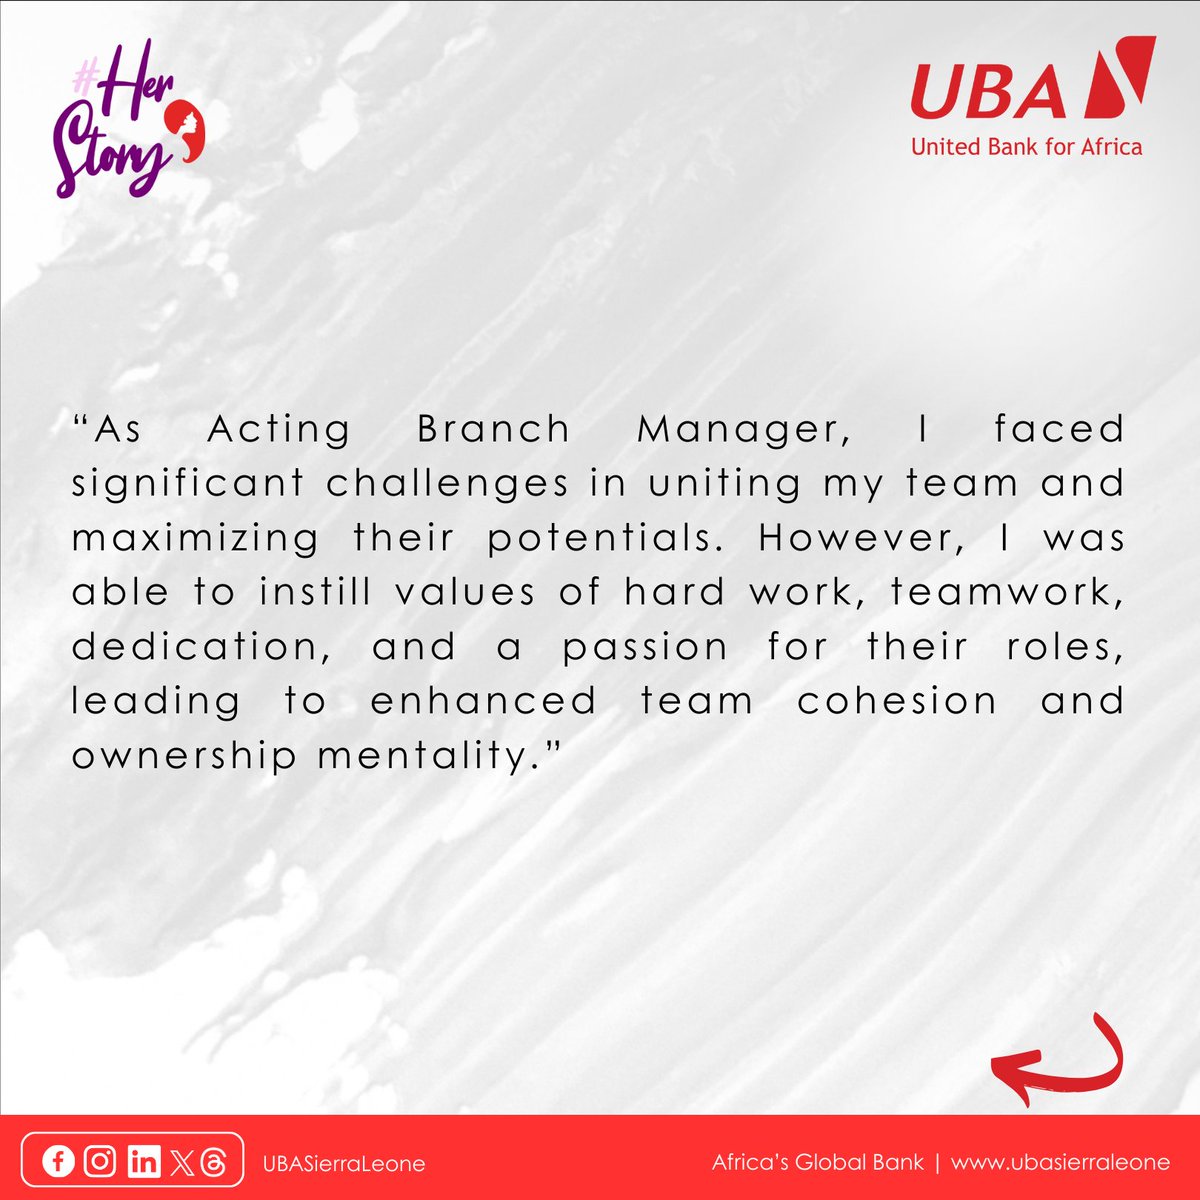 Meet Thomosia Jombla, whose journey from Relationship Manager to Branch Manager at UBA Sierra Leone exemplifies determination and faith, leading her branch to unprecedented success.

#AfricasGlobalBank #UBAHerStory #WomensMonth